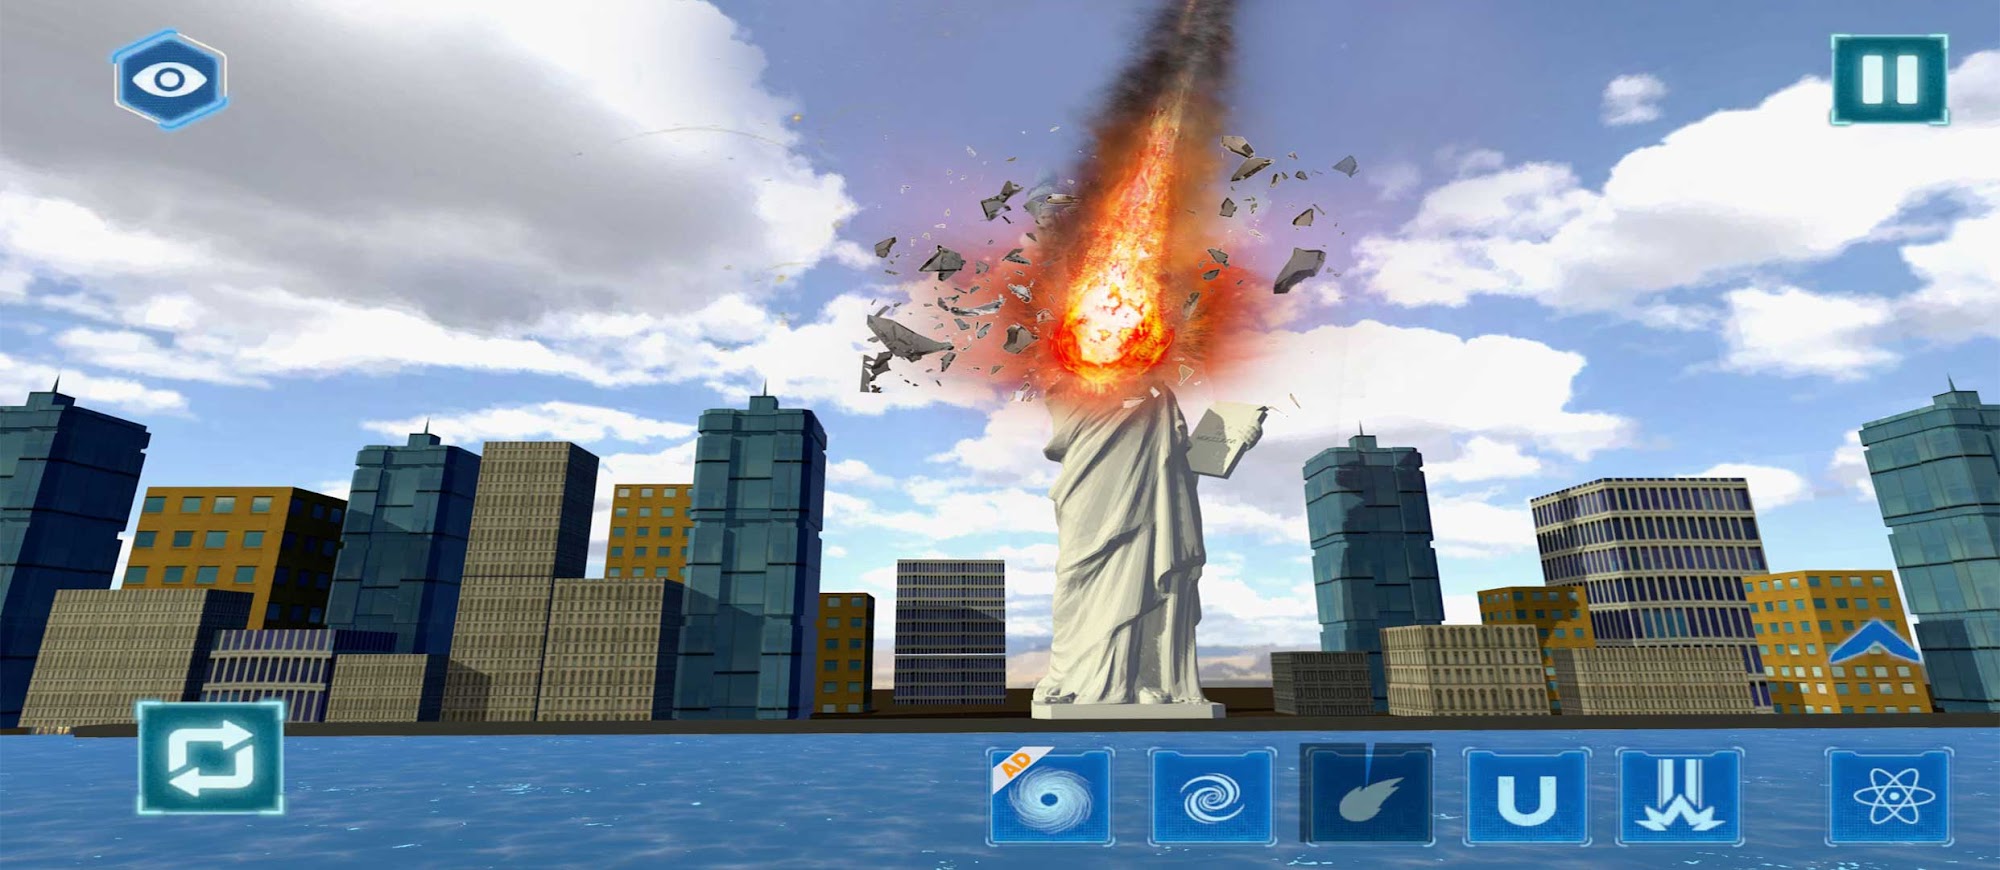 Download City Smash: Destroy the City Android free game.